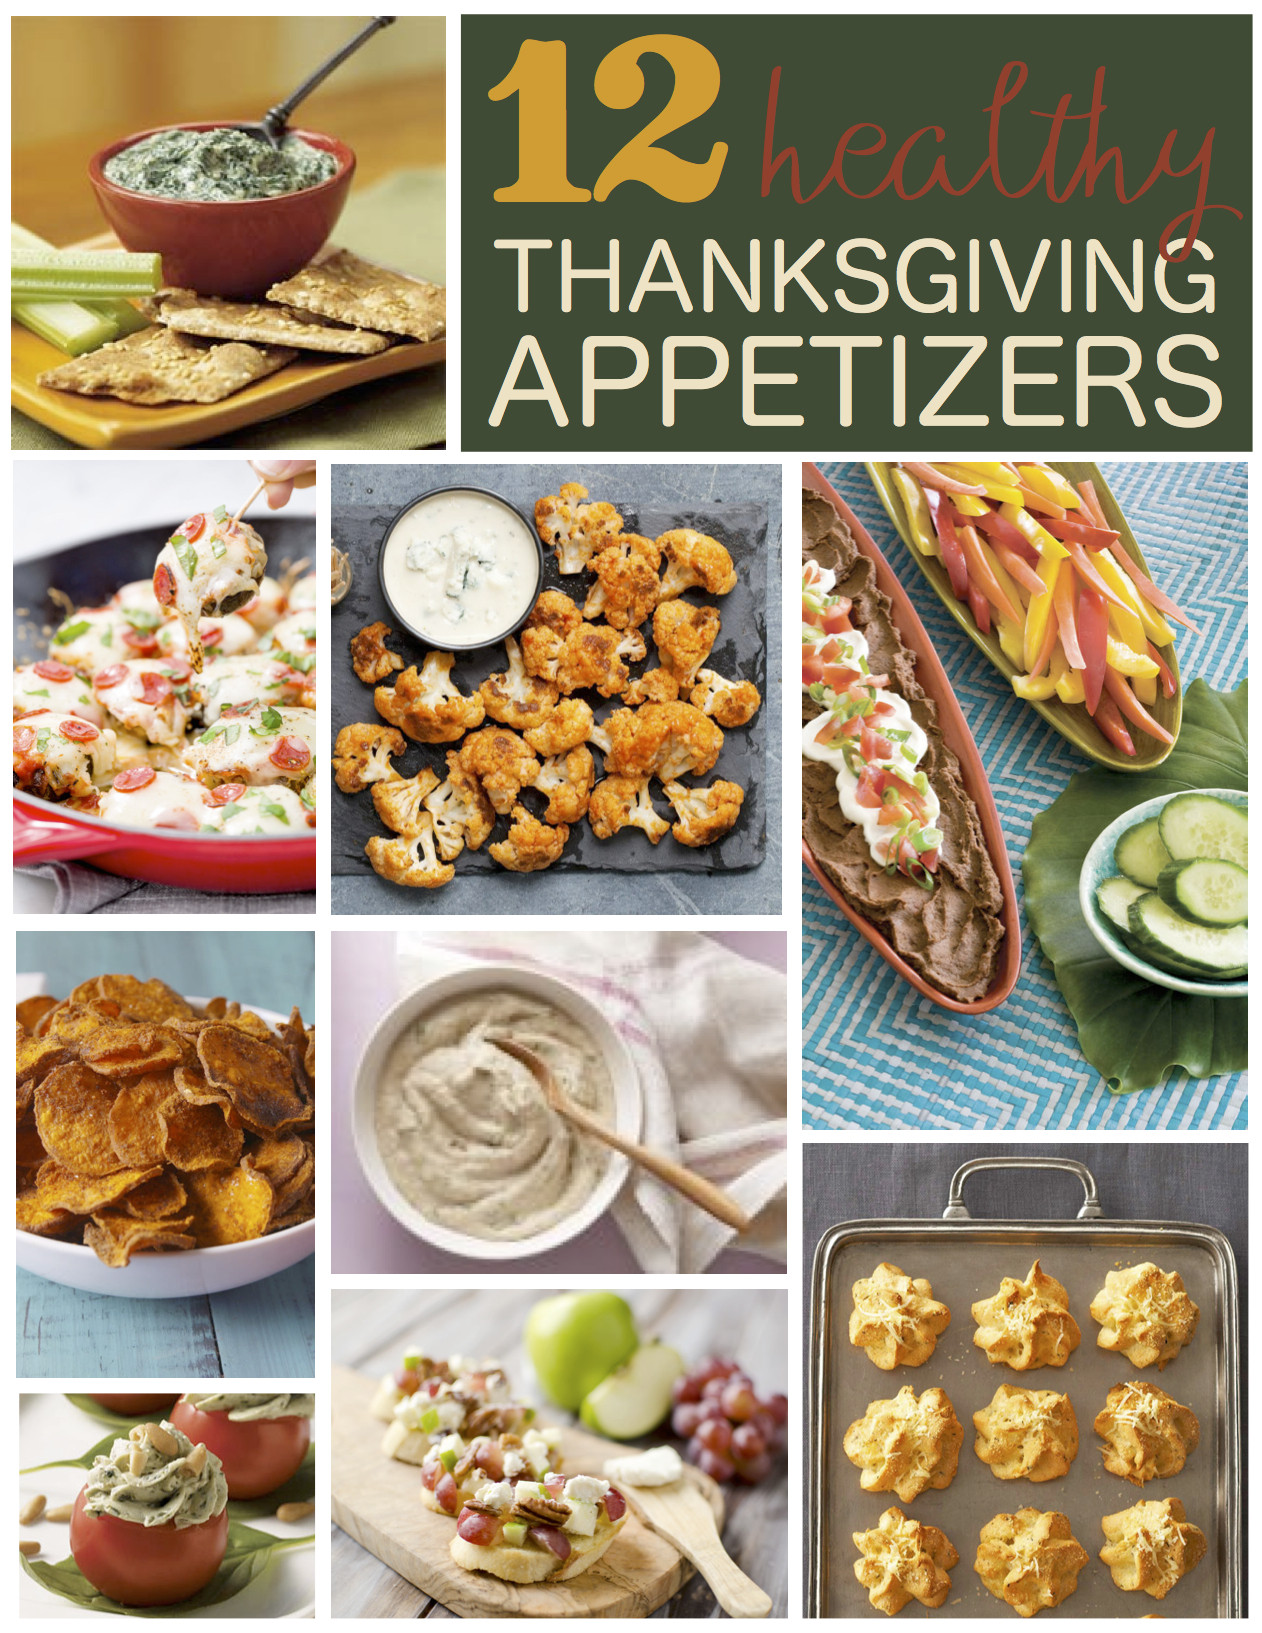 Appetizers For Thanksgiving Dinner Party
 12 Healthy Thanksgiving Appetizer Recipes Six Clever Sisters